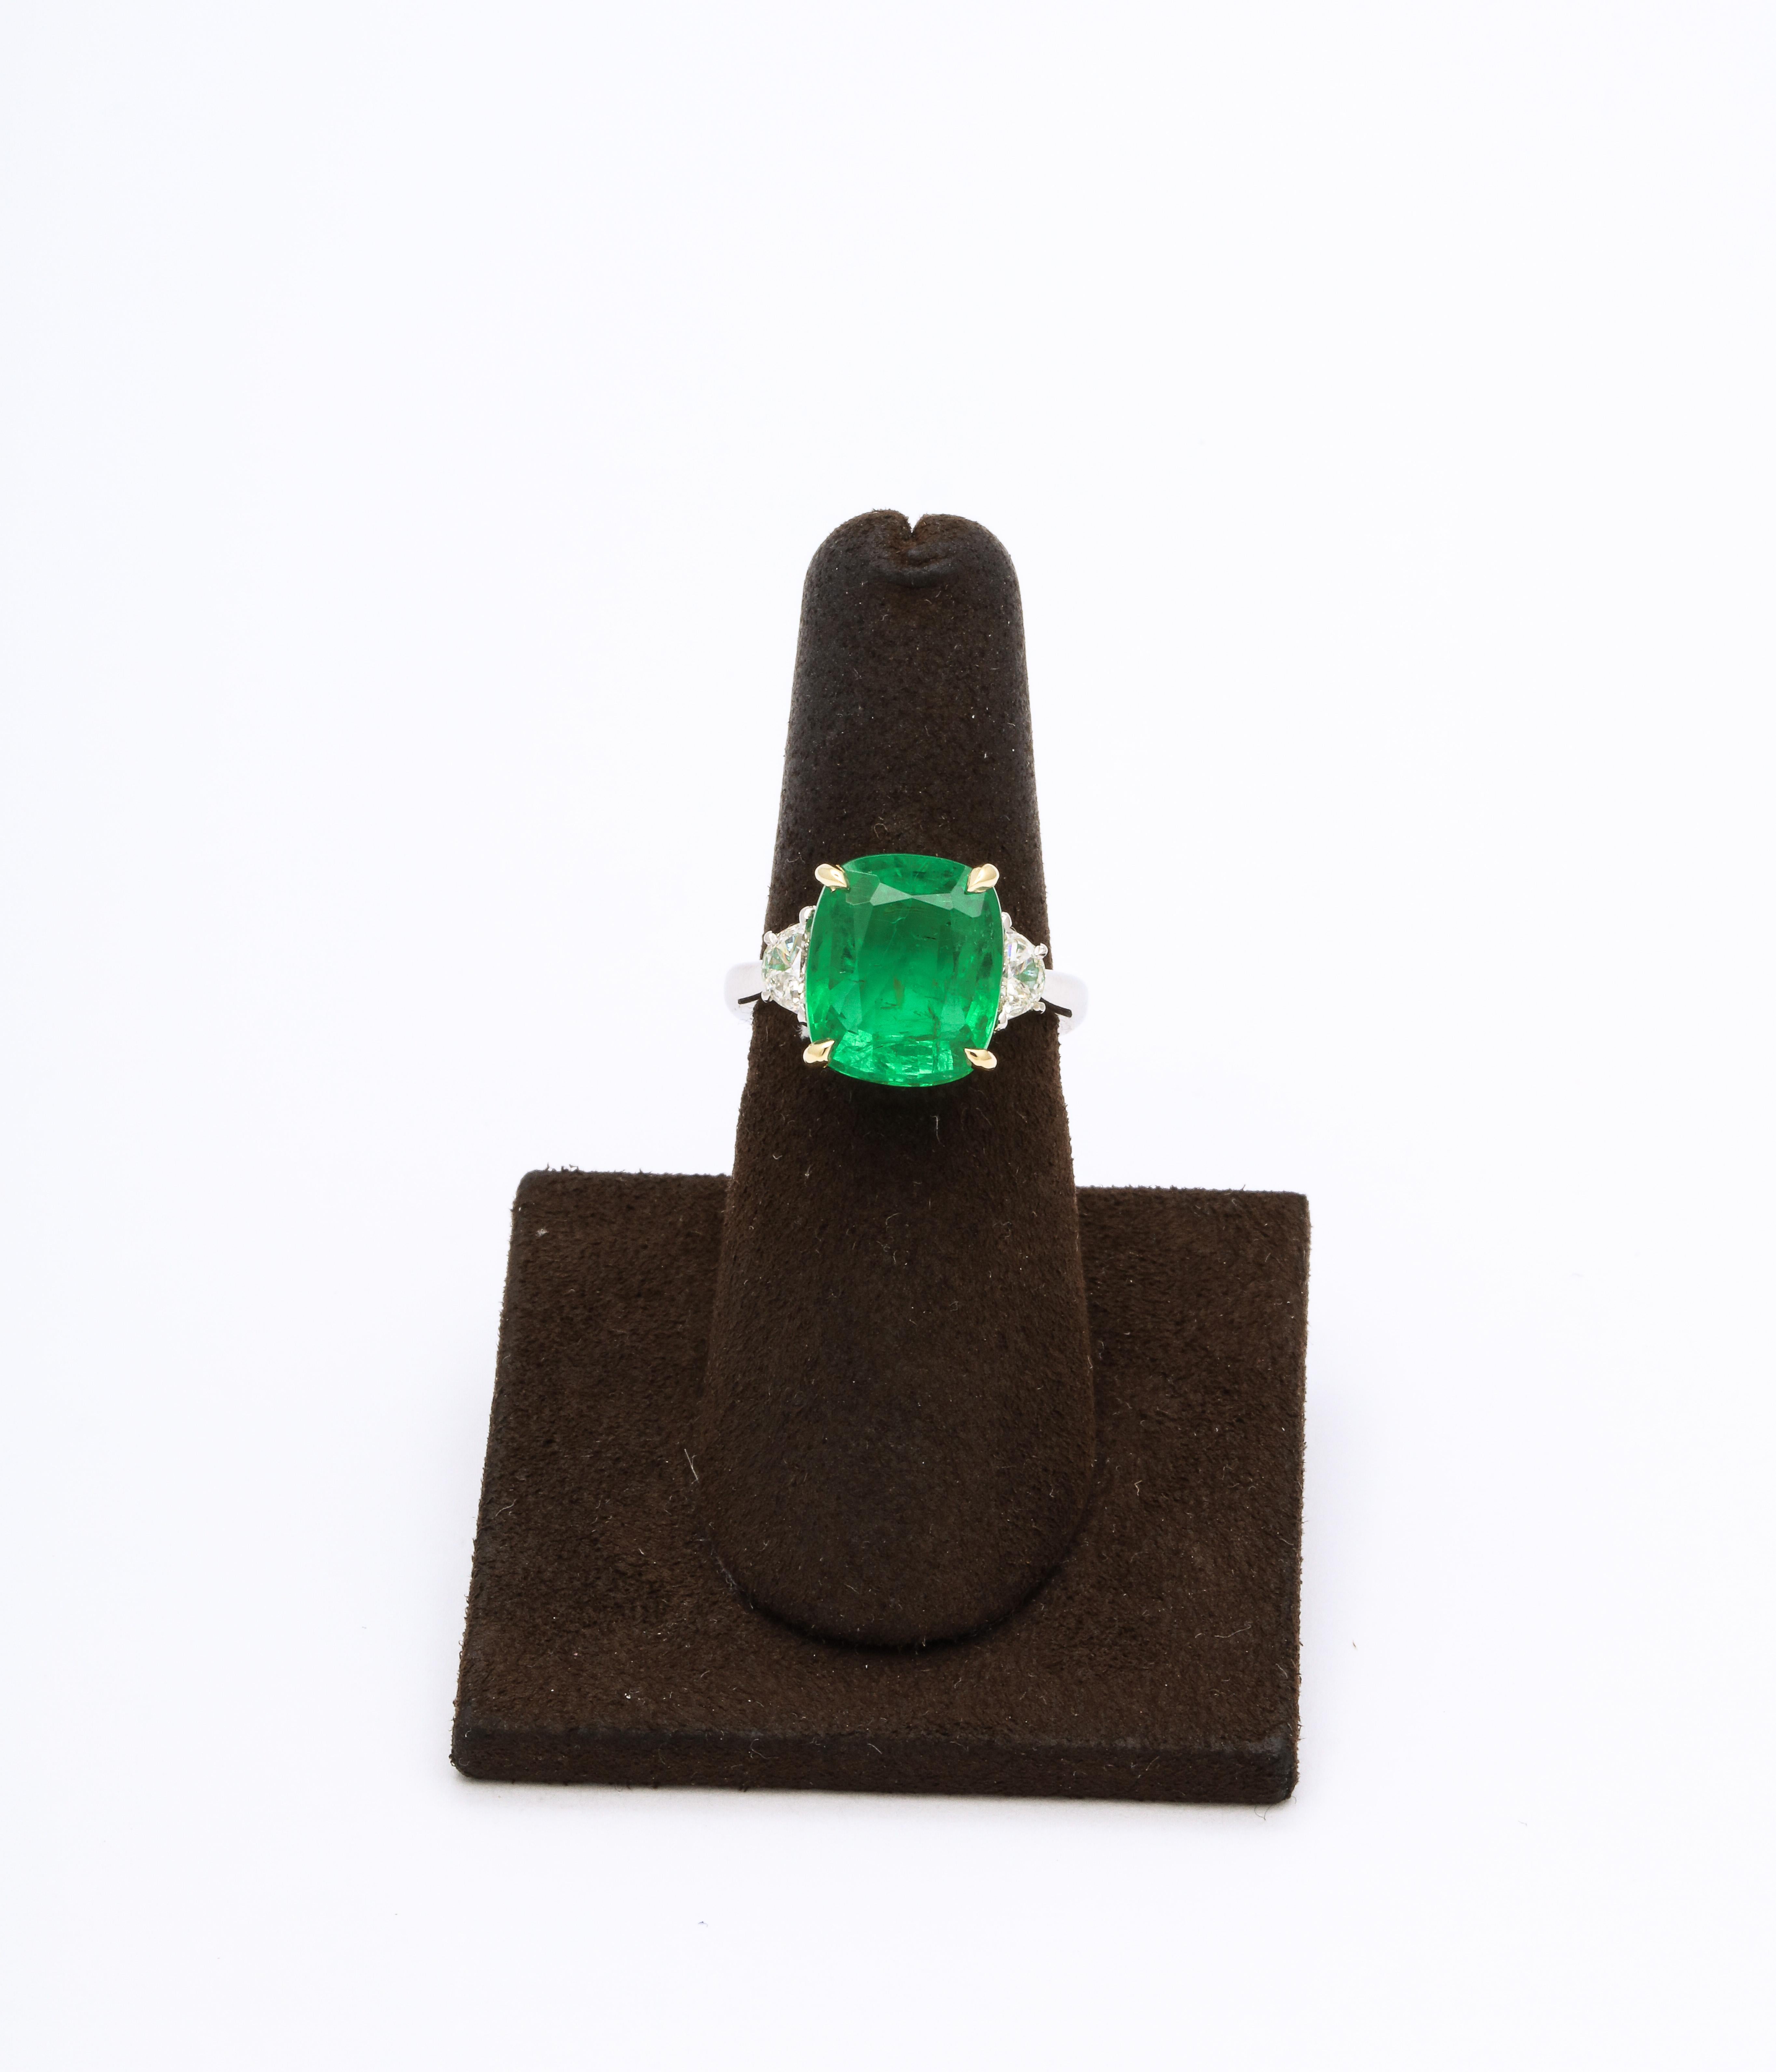 
6.09 carat Certified “Vivid Green” Cushion cut Emerald.

.47 carats of white half moon cut diamonds on the side. 

Custom platinum and 18k yellow gold setting. 

Currently a size 6, this ring can easily be sized. 

A beautiful emerald with fabulous